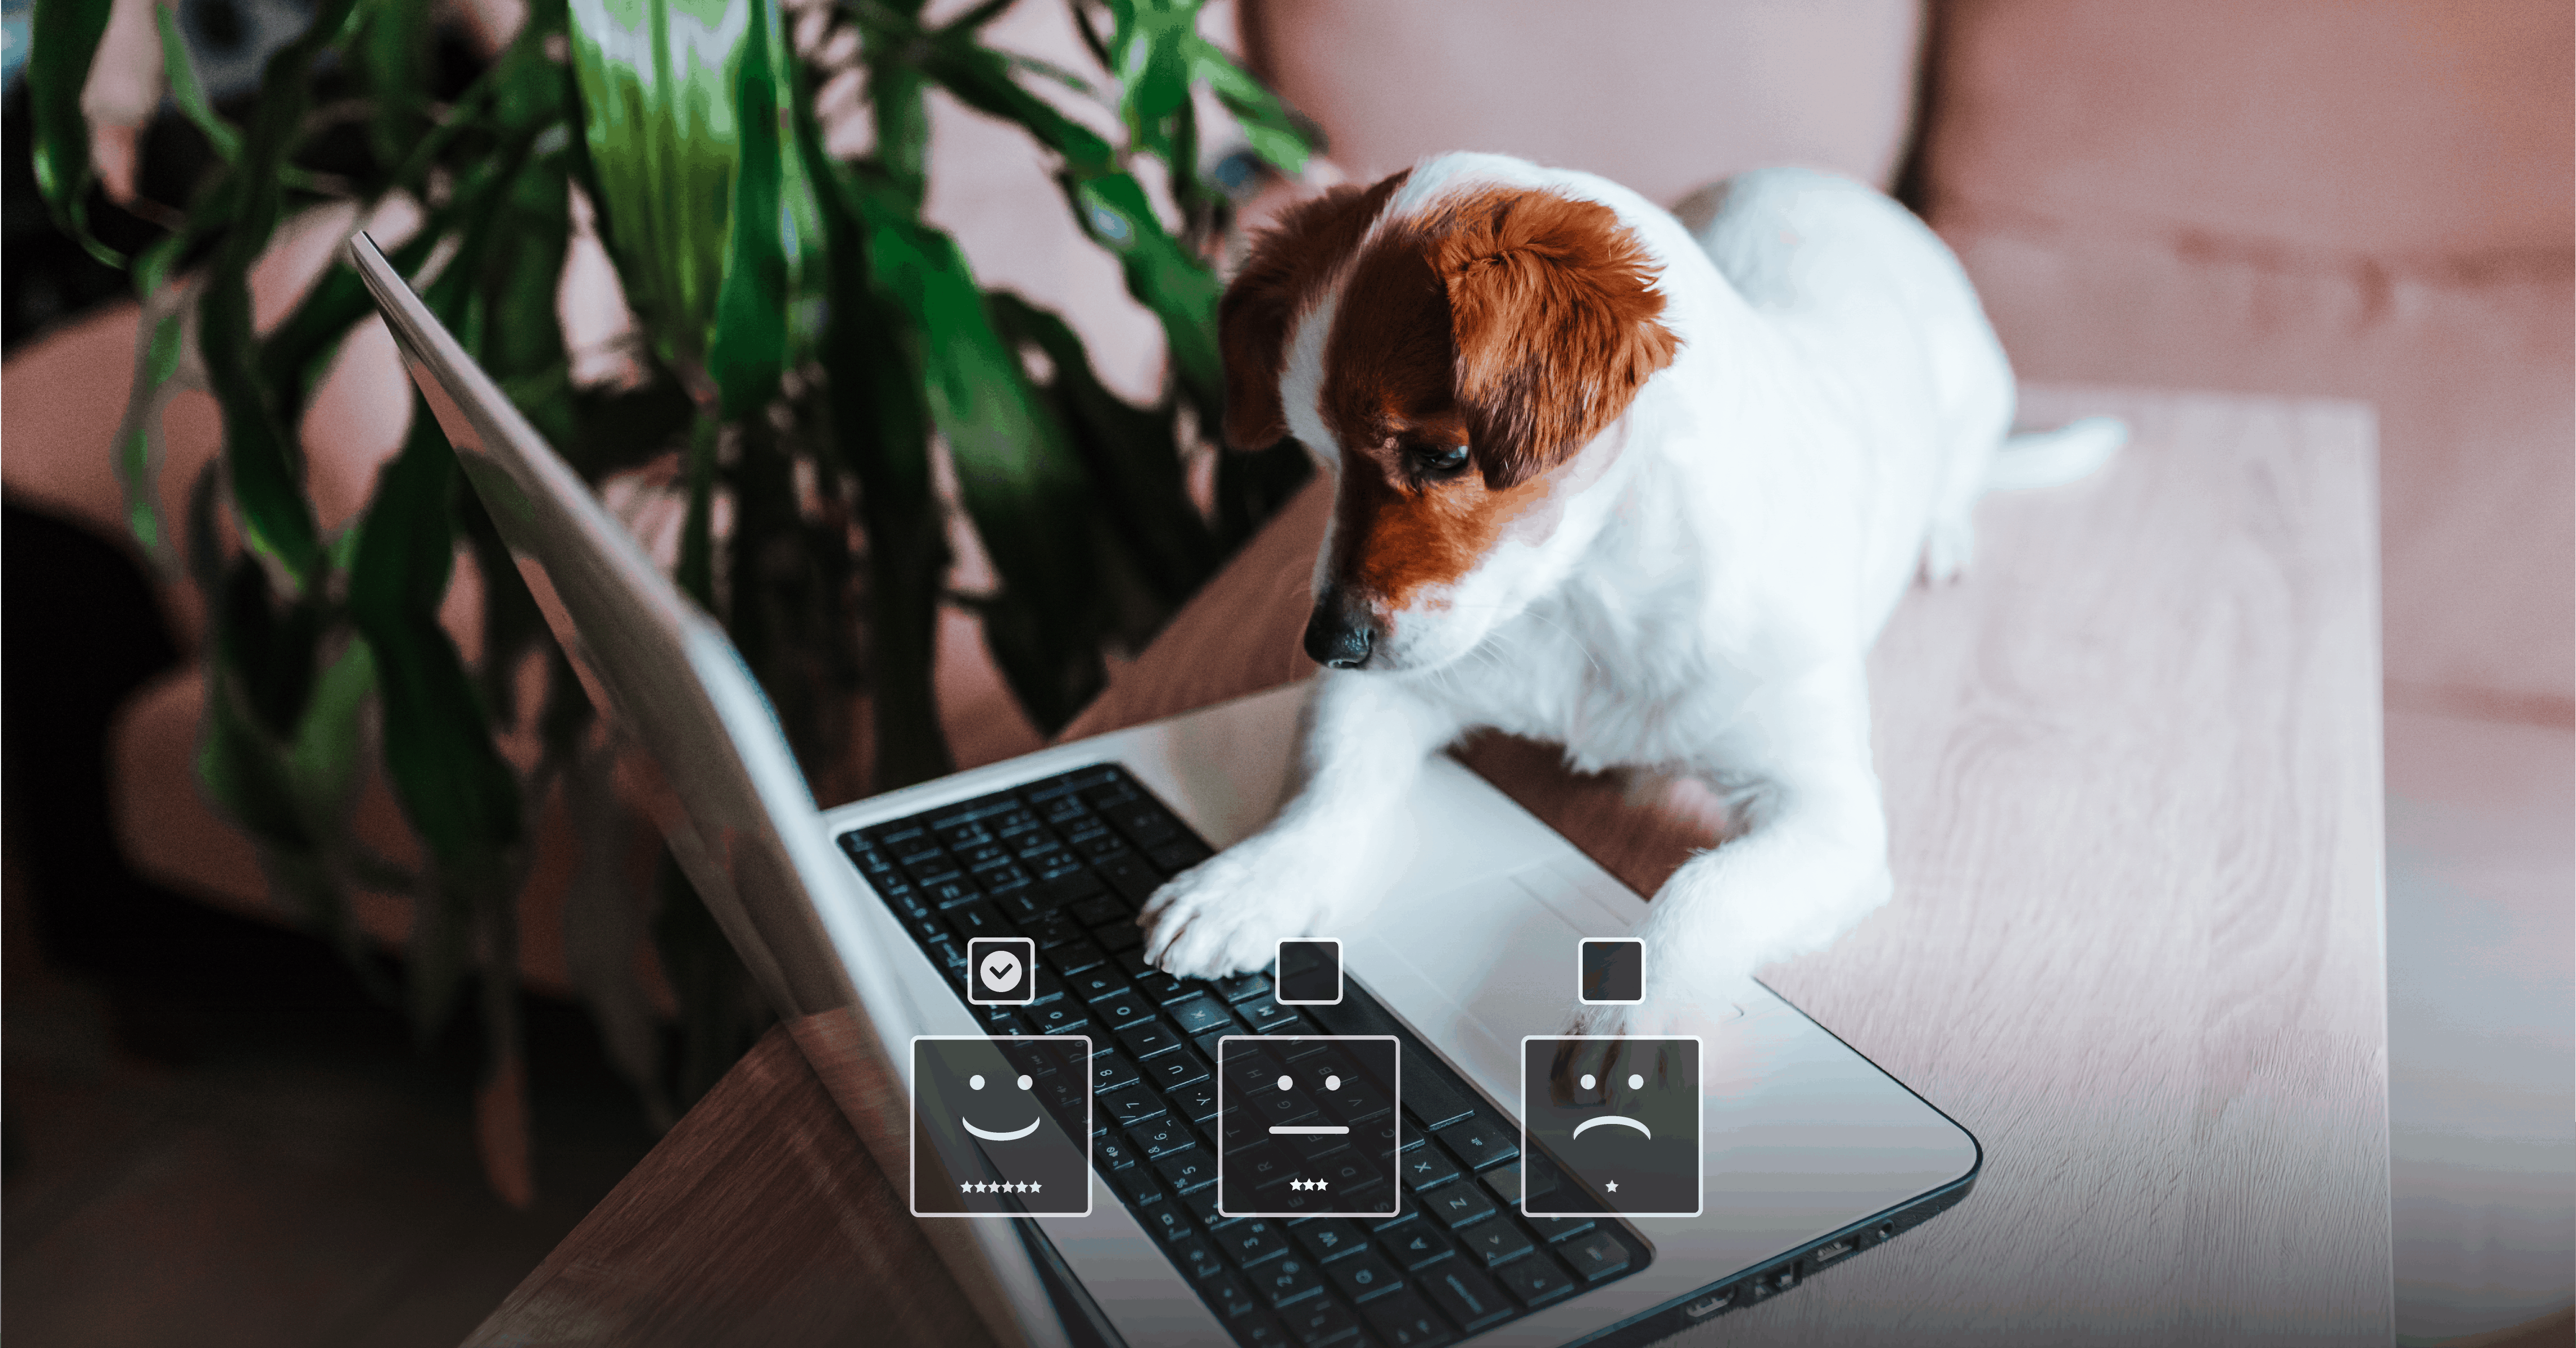 A dog seated on a table looks at a laptop with a paw on the keyboard. 3 icons show happy, neutral, and sad faces at the bottom of the image.